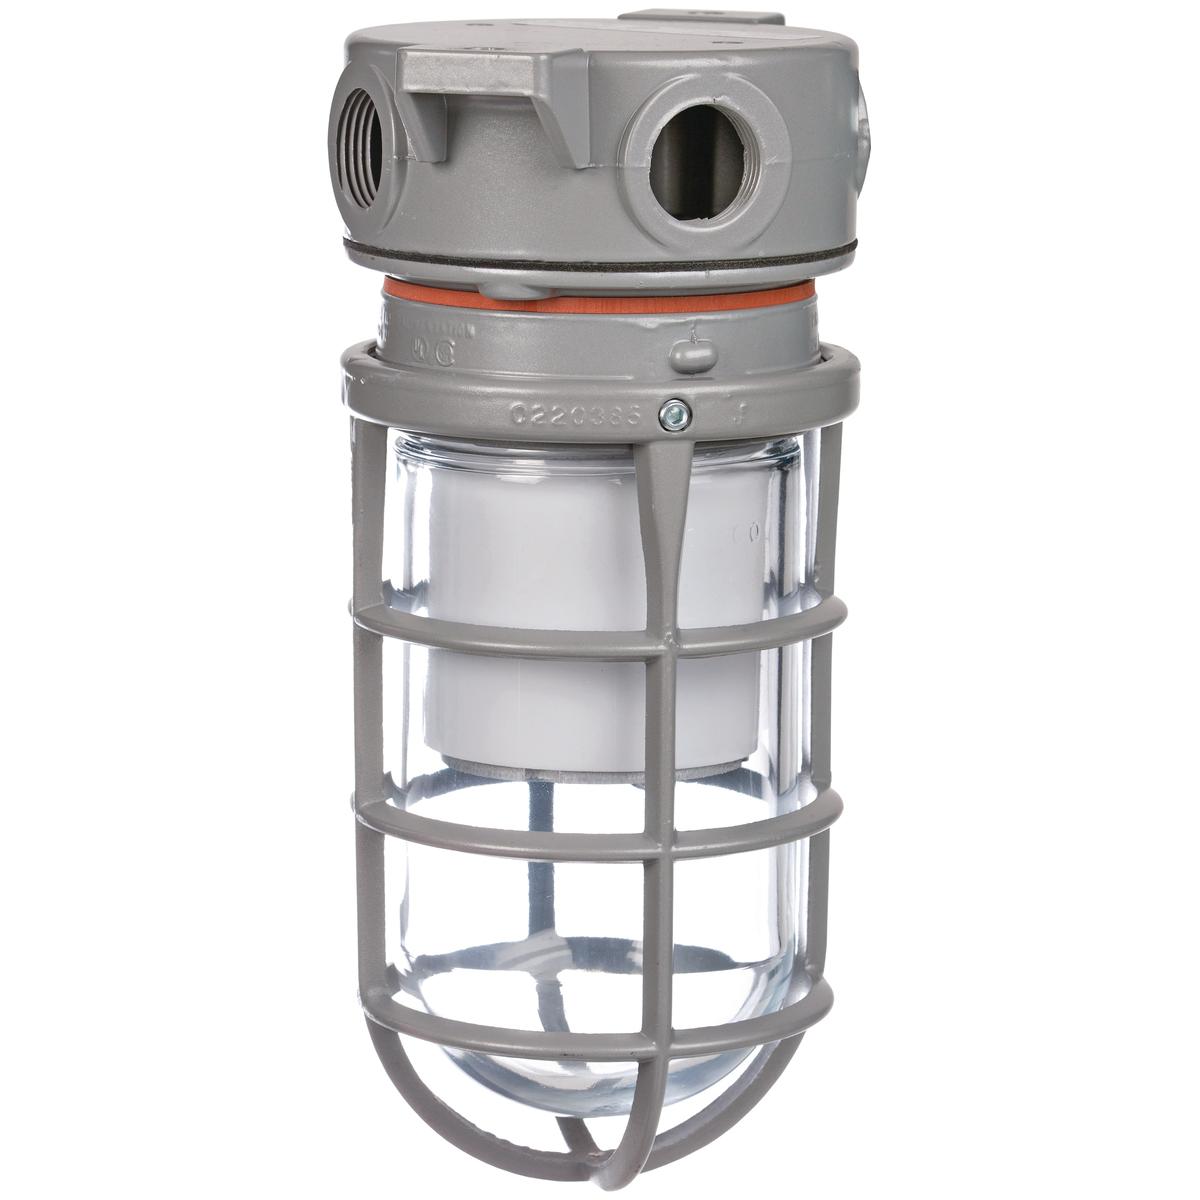 Hubbell VSL1630F1SG The VSL Series is a Vapor Tight/ Utility fixture using energy efficient LED's. This fixture is made with a cast copper-free aluminum housing and mount that is  suitable for harsh and hazardous environments. With the design of this fixtures internal heat s